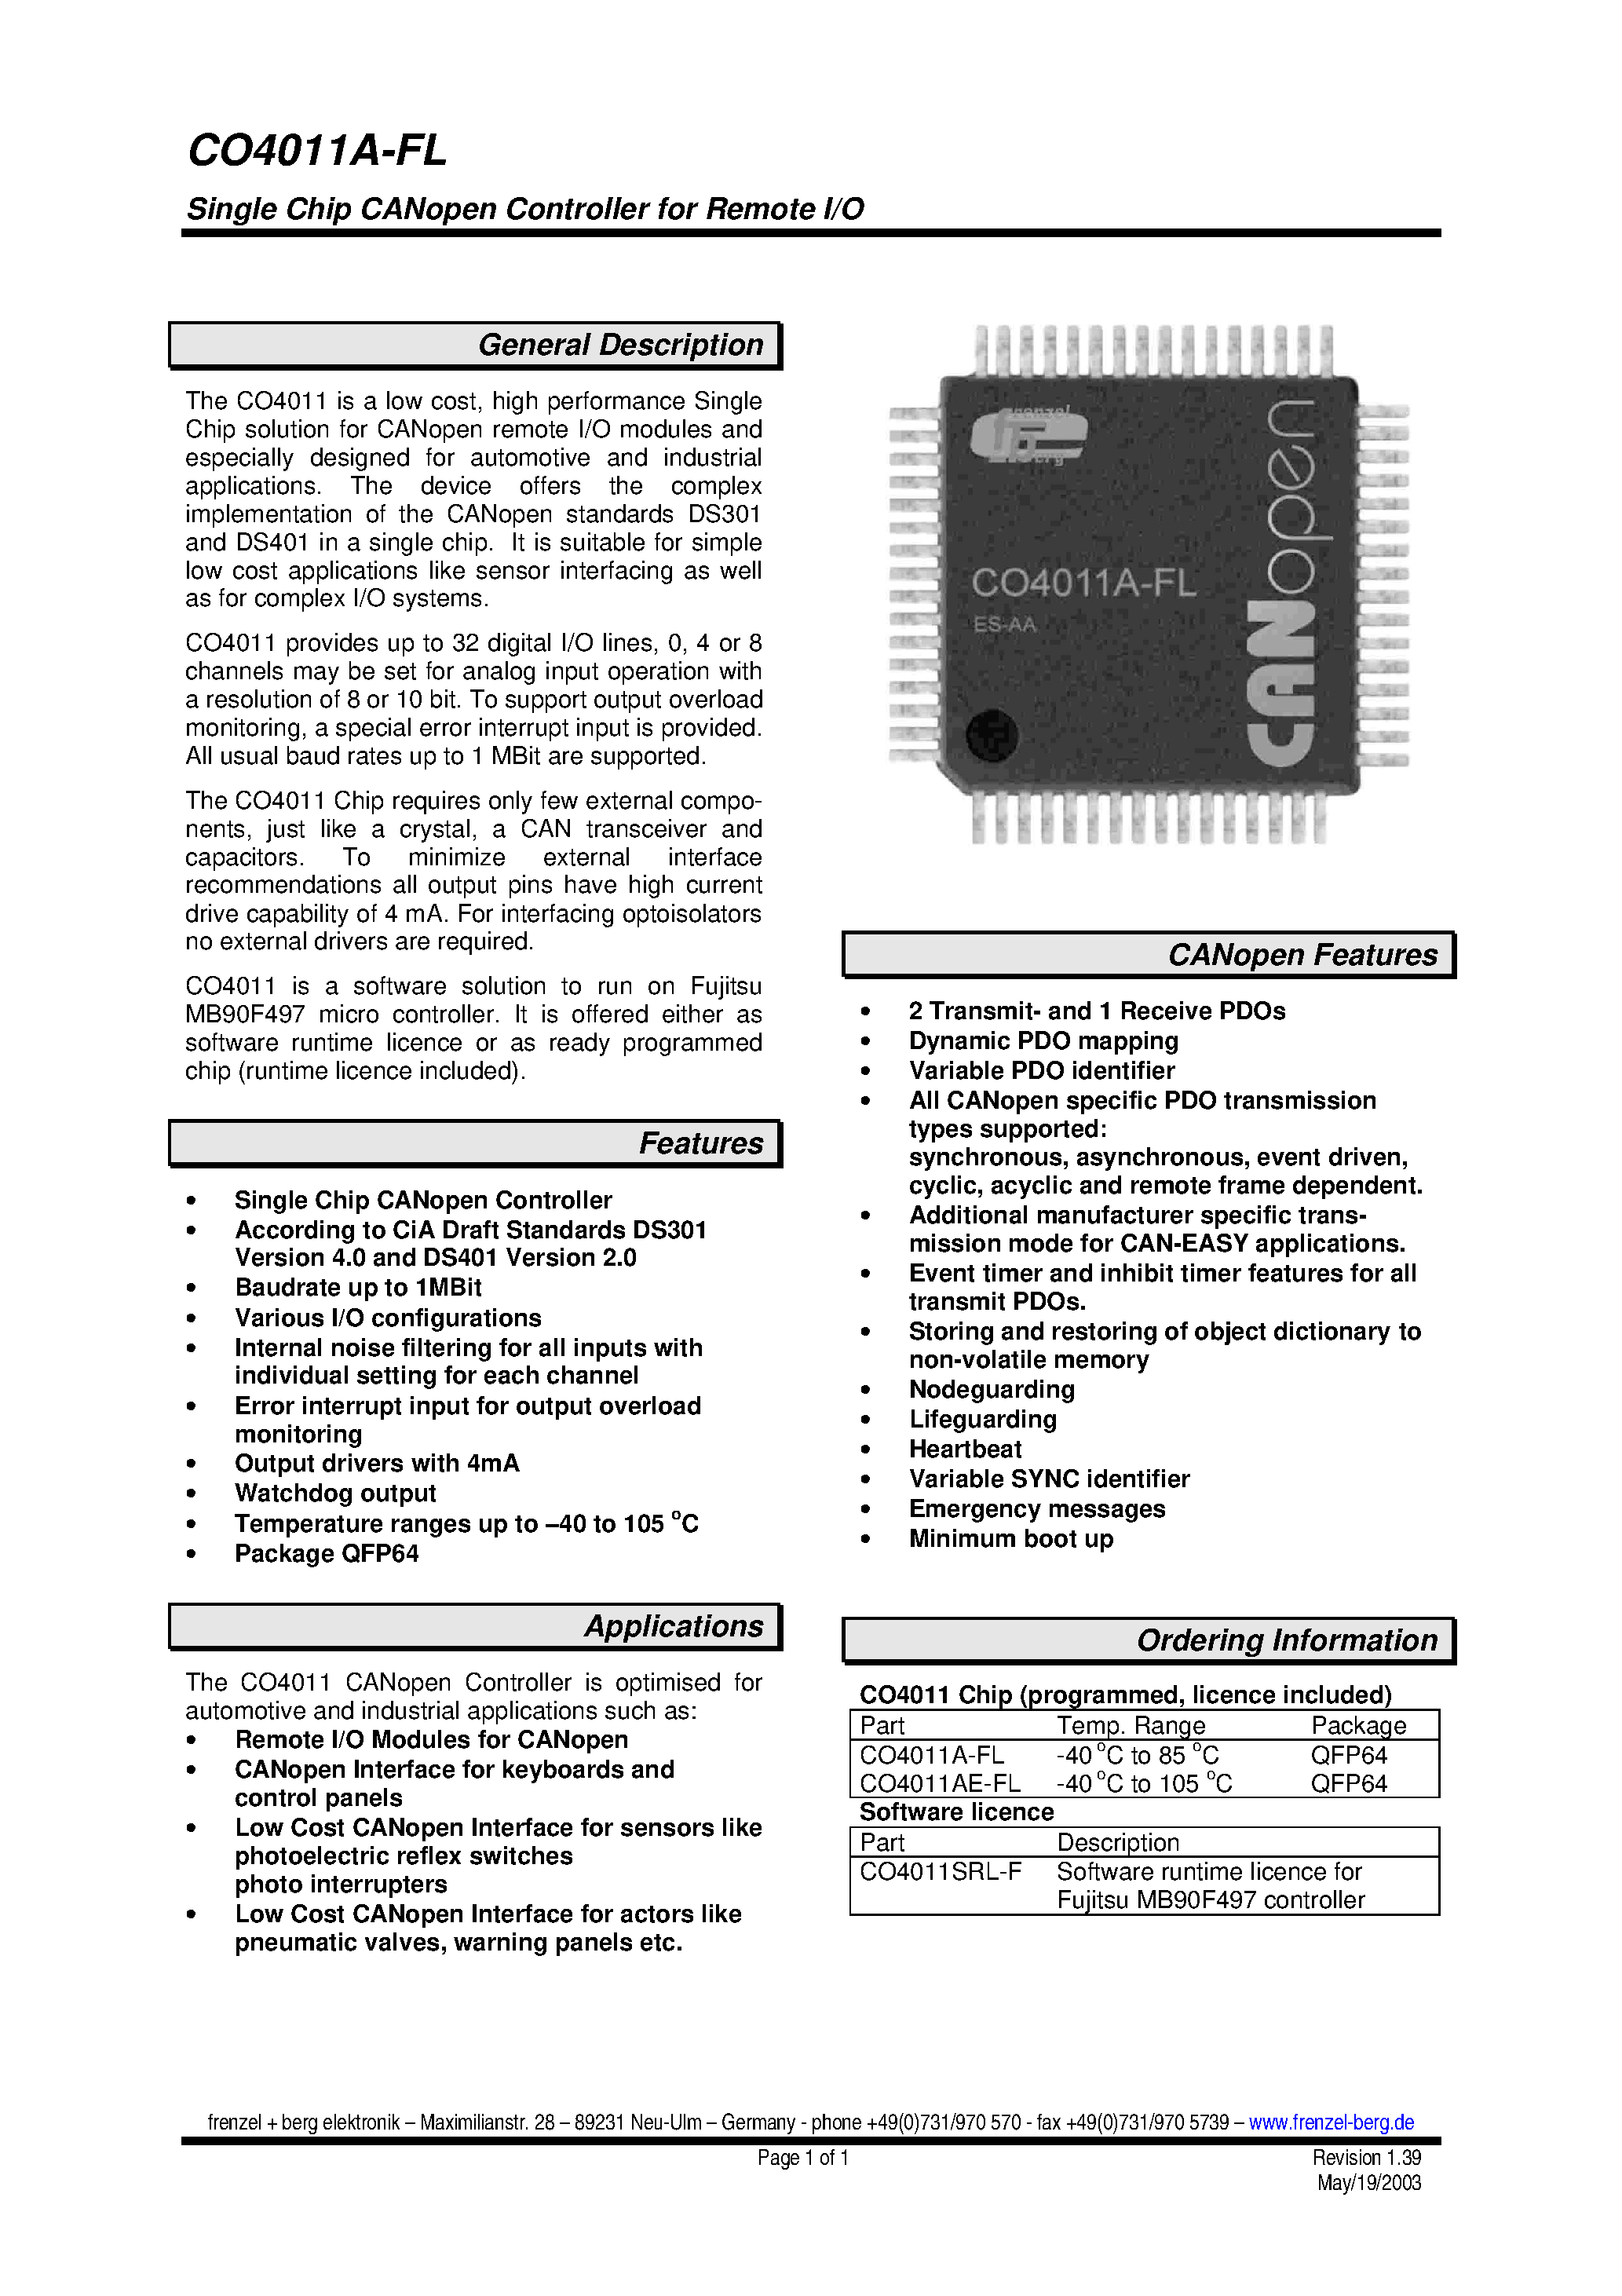 Datasheet CO4011A-FL - Single Chip CANopen Controller for Remote I/O page 1